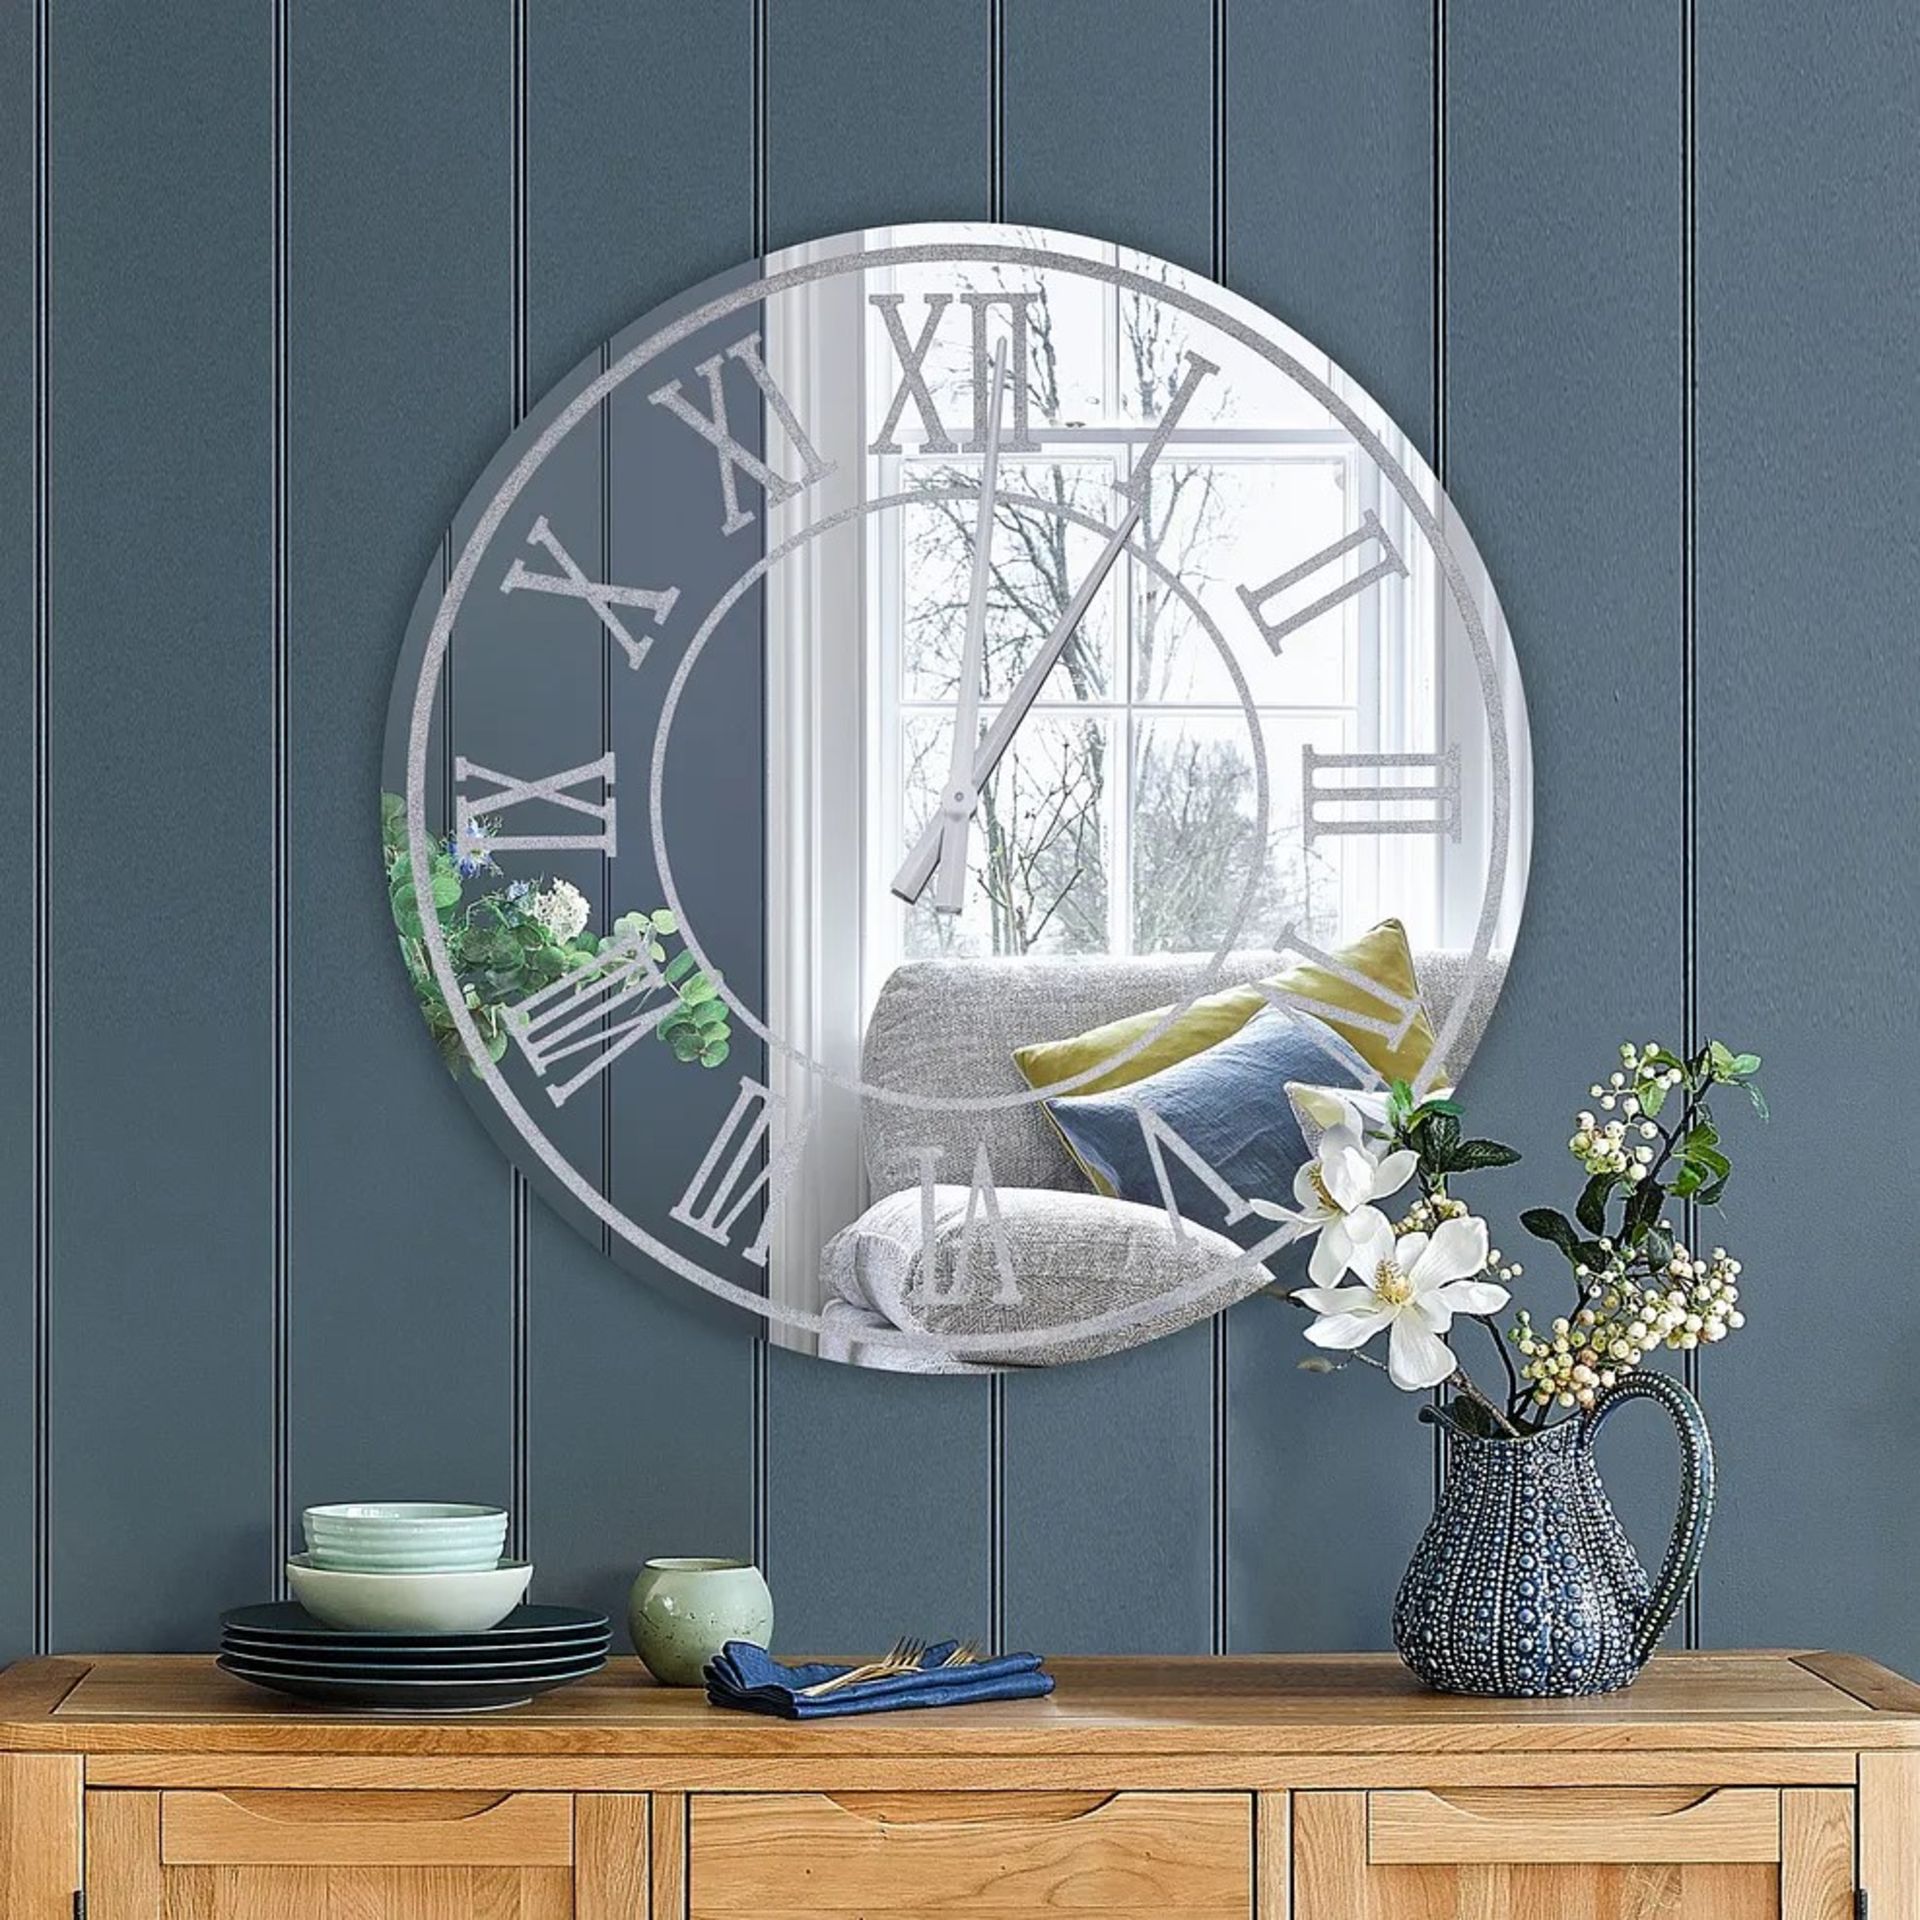 RRP £149.99 - Oak Furnitureland LARGE AVERY WALL CLOCK Silver Mirror 80CM- MAY HAVE A FEW